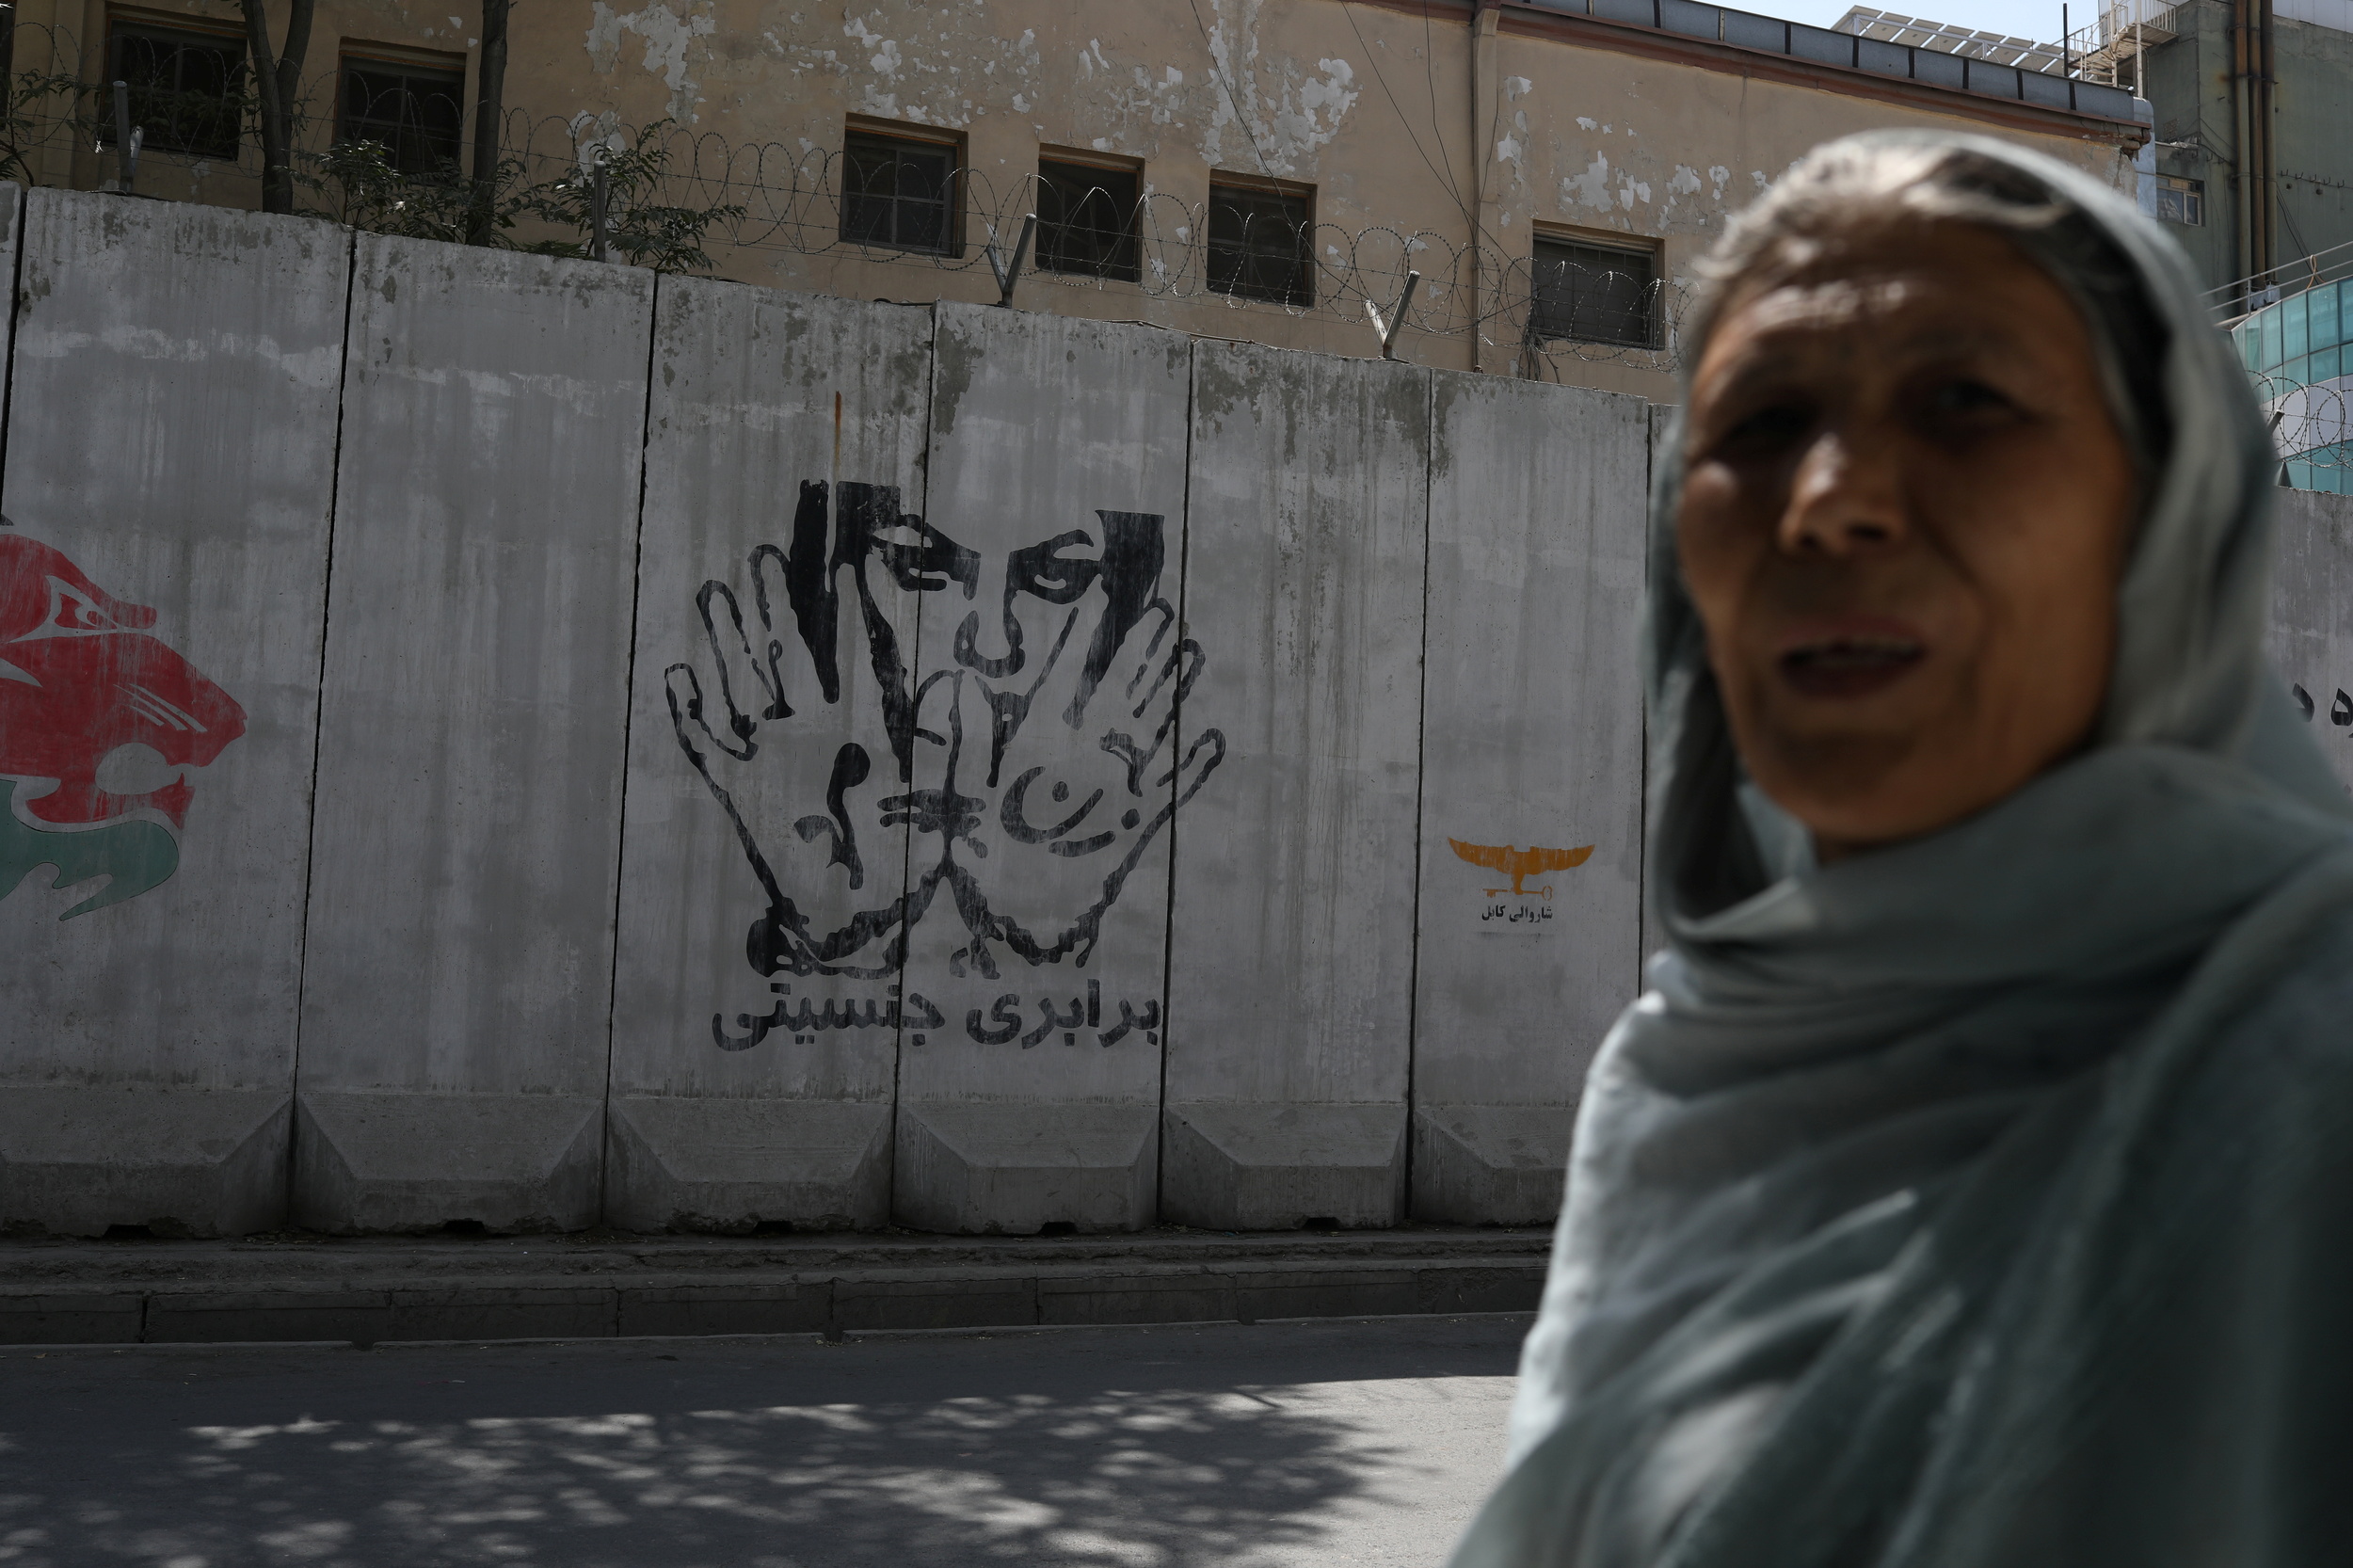 A mural reading "gender equality" is seen behind a woman in Kabul